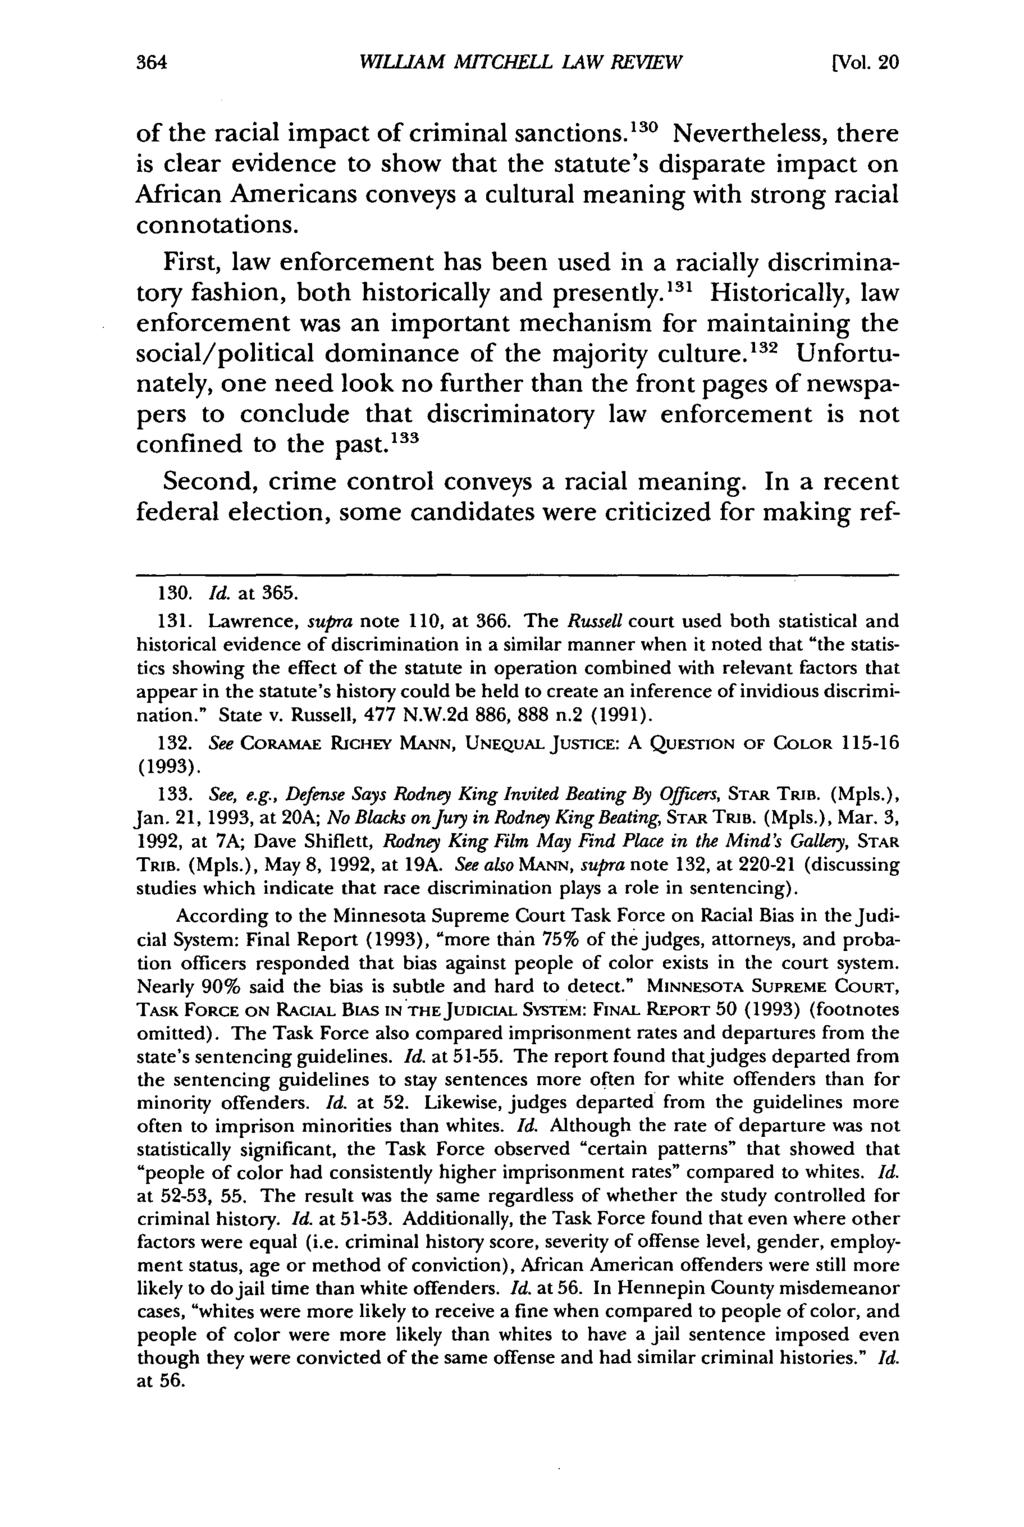 William Mitchell WILLIAM Law MITCHELL Review, Vol. 20, LAW Iss. 2 REVIEW [1994], Art. 5 [Vol. 20 of the racial impact of criminal sanctions.